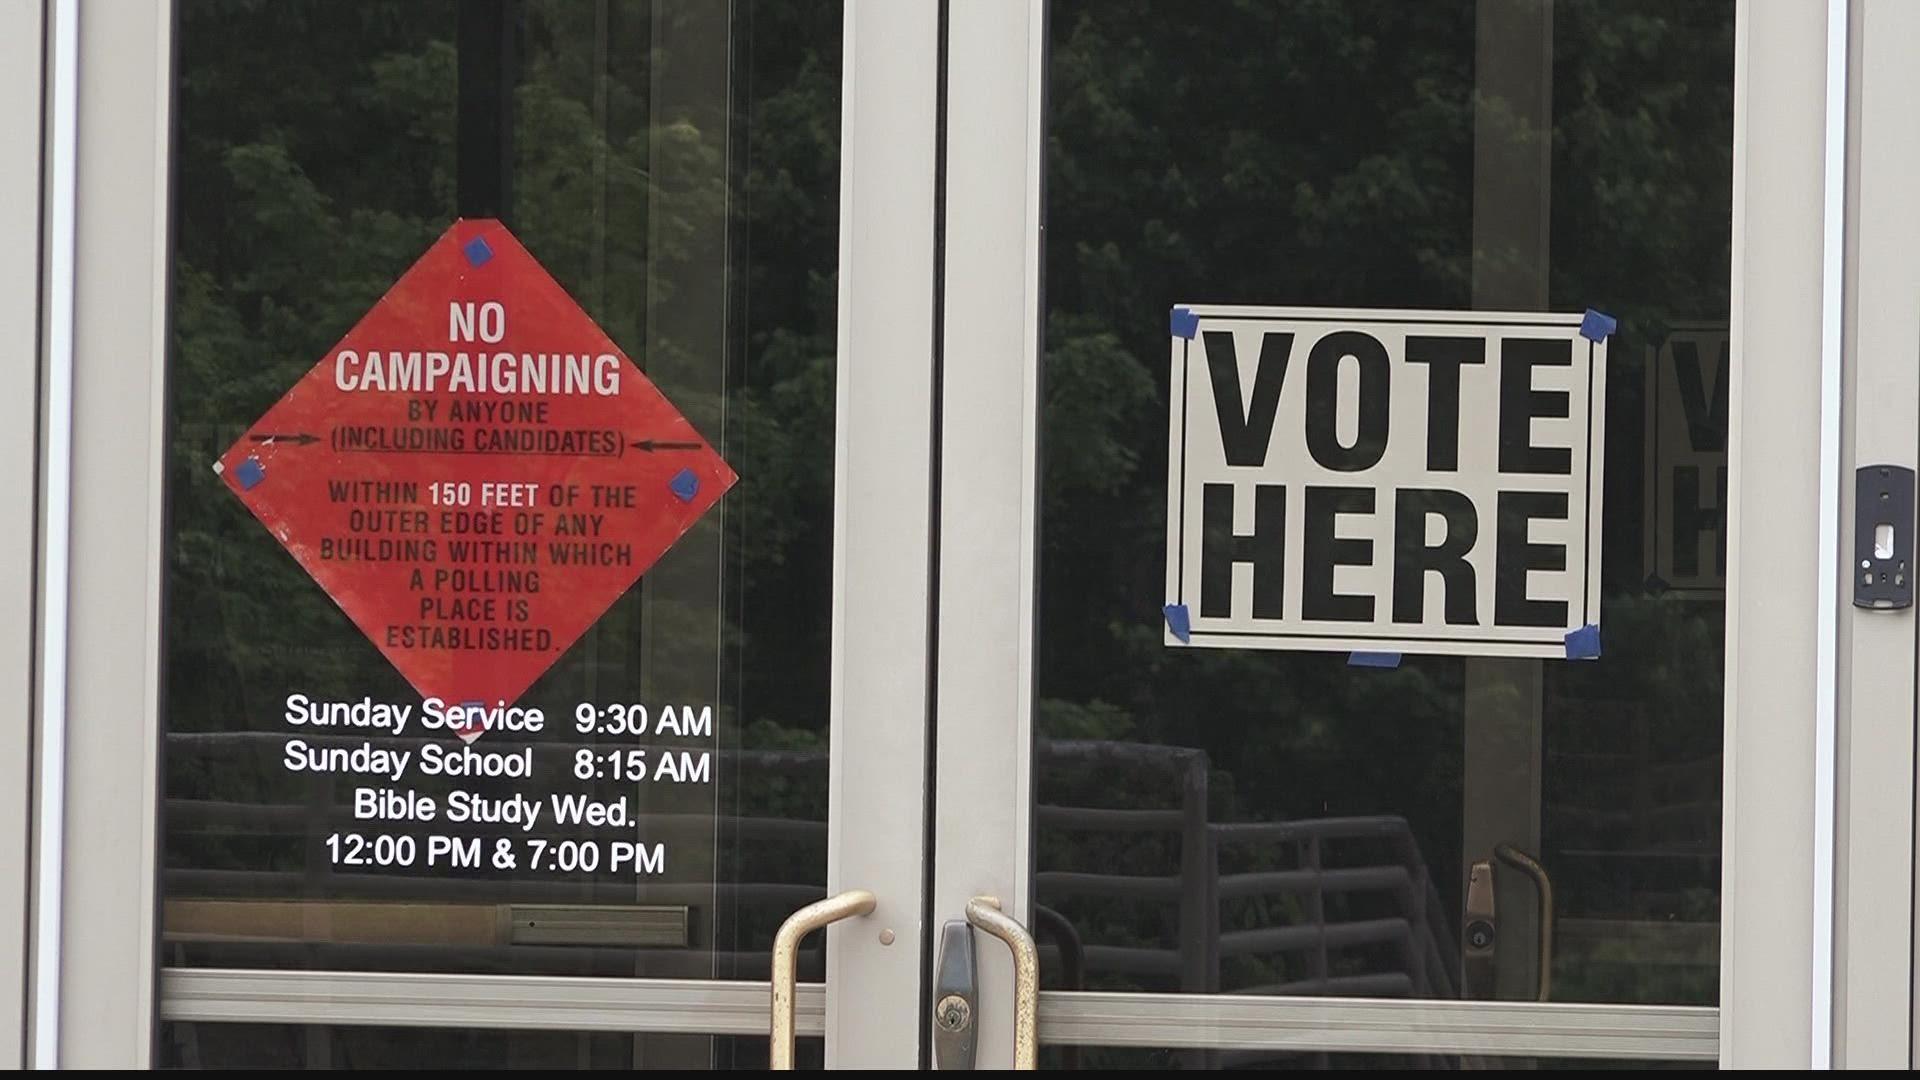 Only one Sunday was approved, according to the Cobb County director of elections and registration.